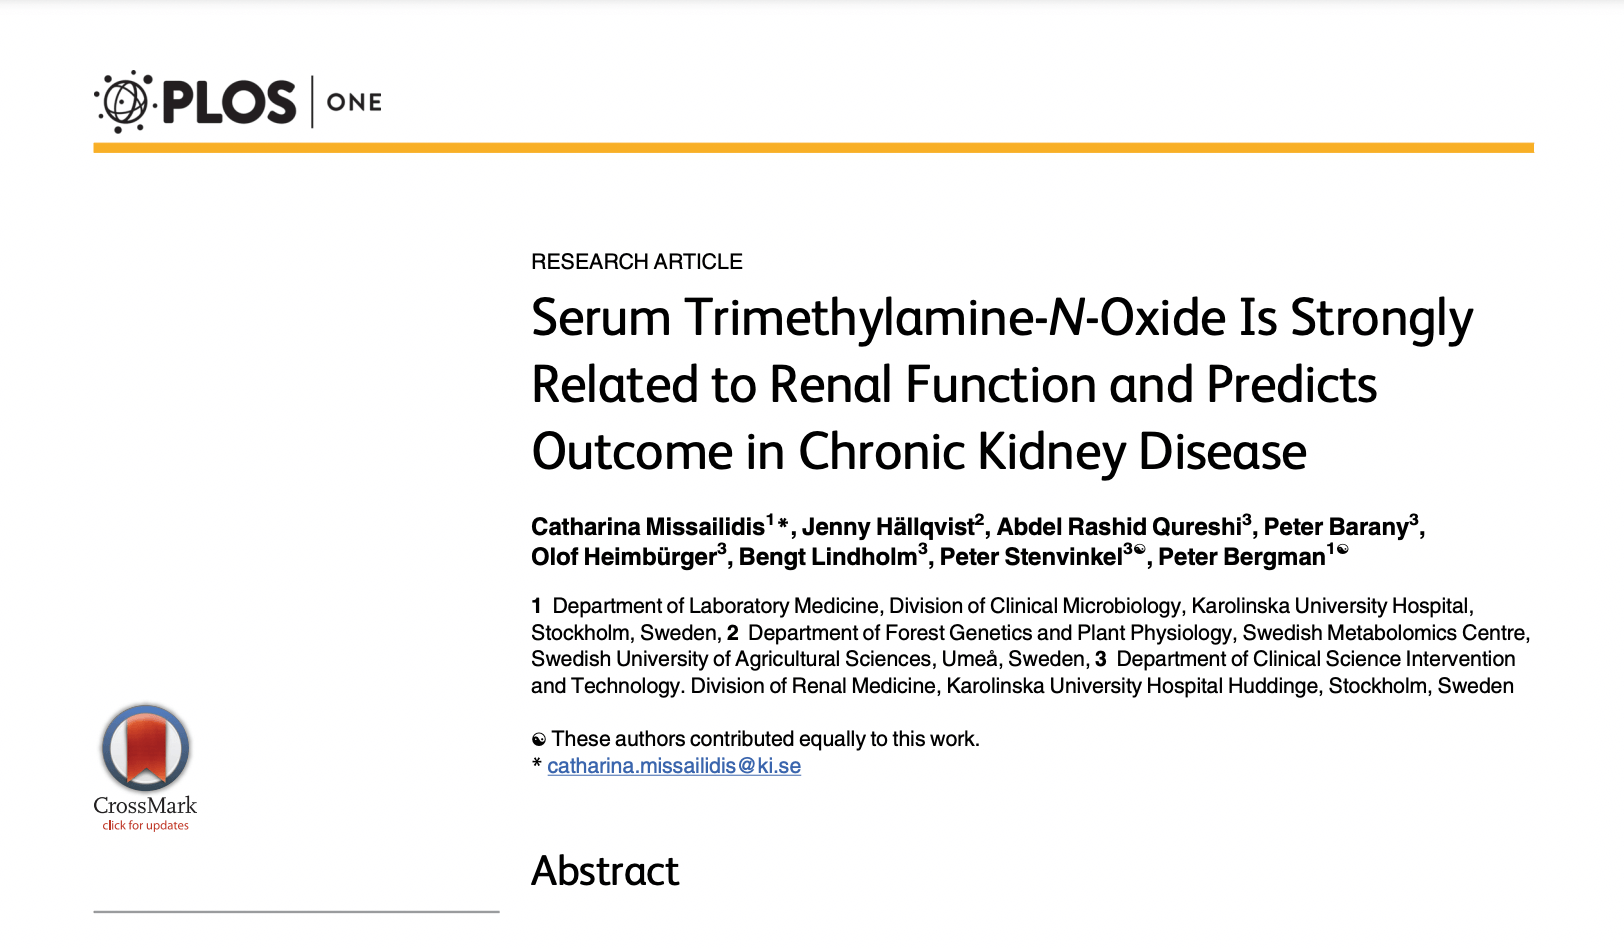 Serum Trimethylamine-N-Oxide Is Strongly Related to Renal Function and Predicts Outcome in Chronic Kidney Disease